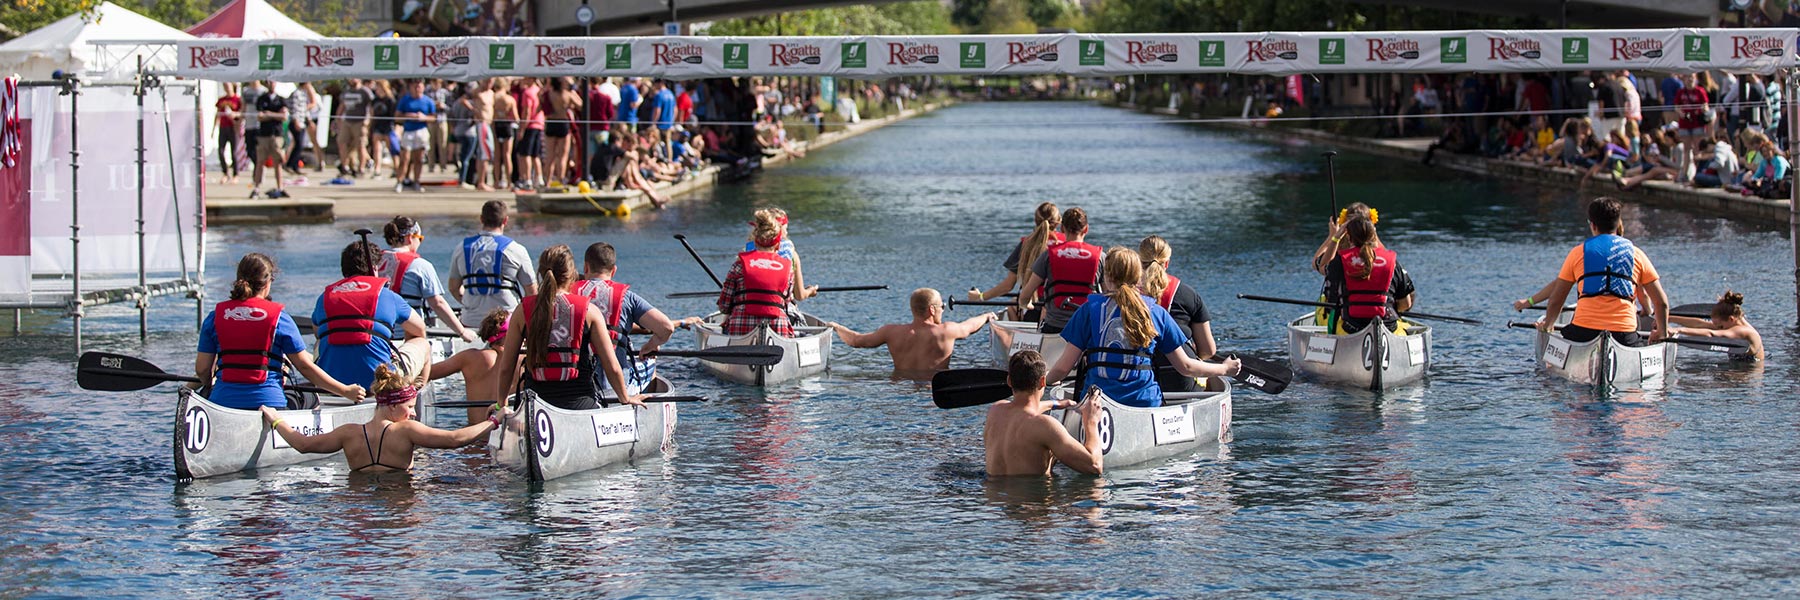 People wait with at the starting line with their canoes at the IUPUI Regatta